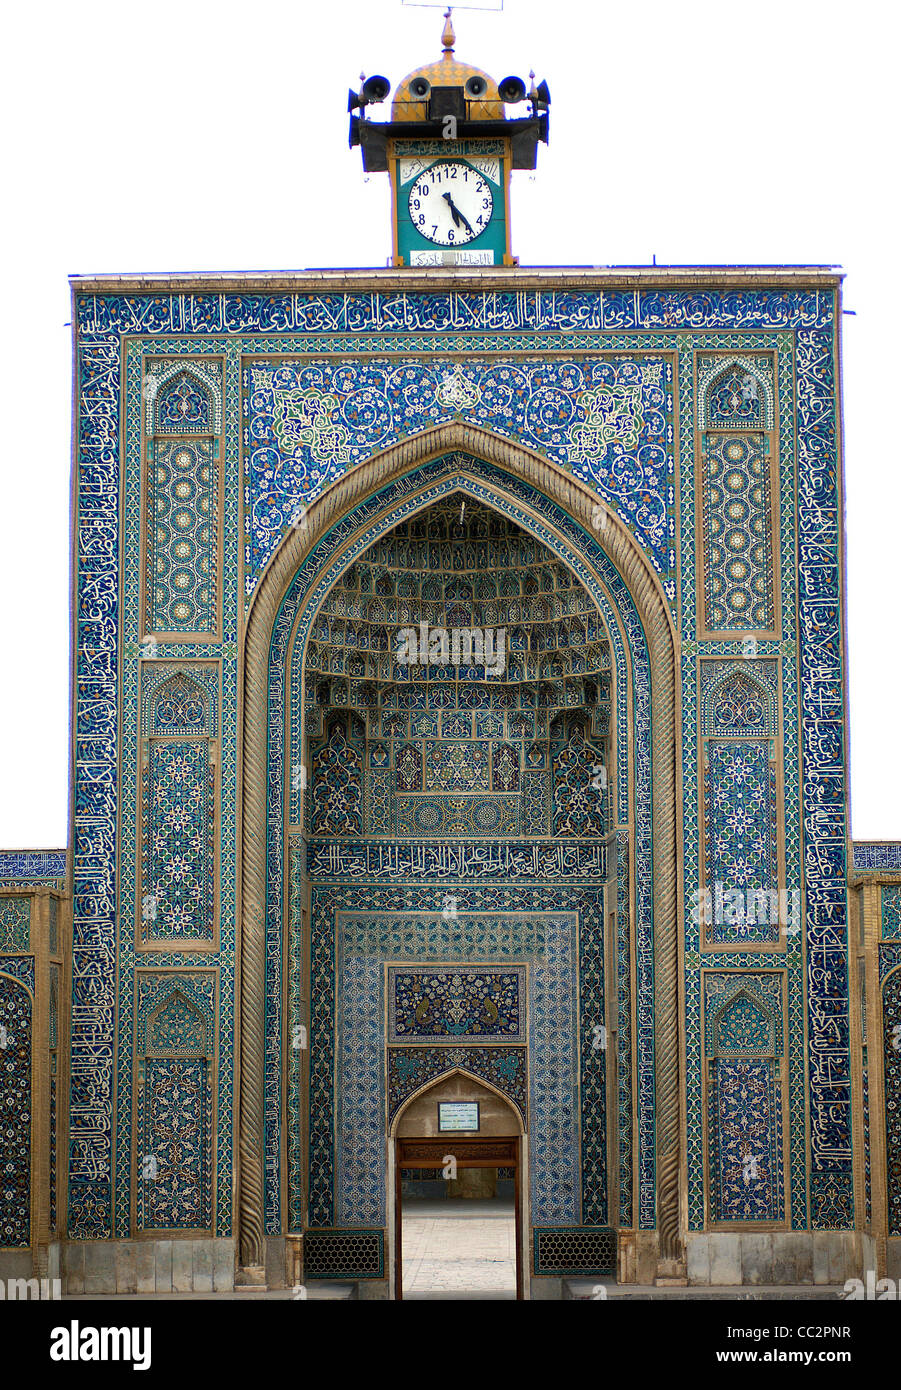 The shimmering blue tiles on the Jameh (Friday) Mosque at Kerman, Iran, date from the 14th century. The clock-tower is unusual. Stock Photo